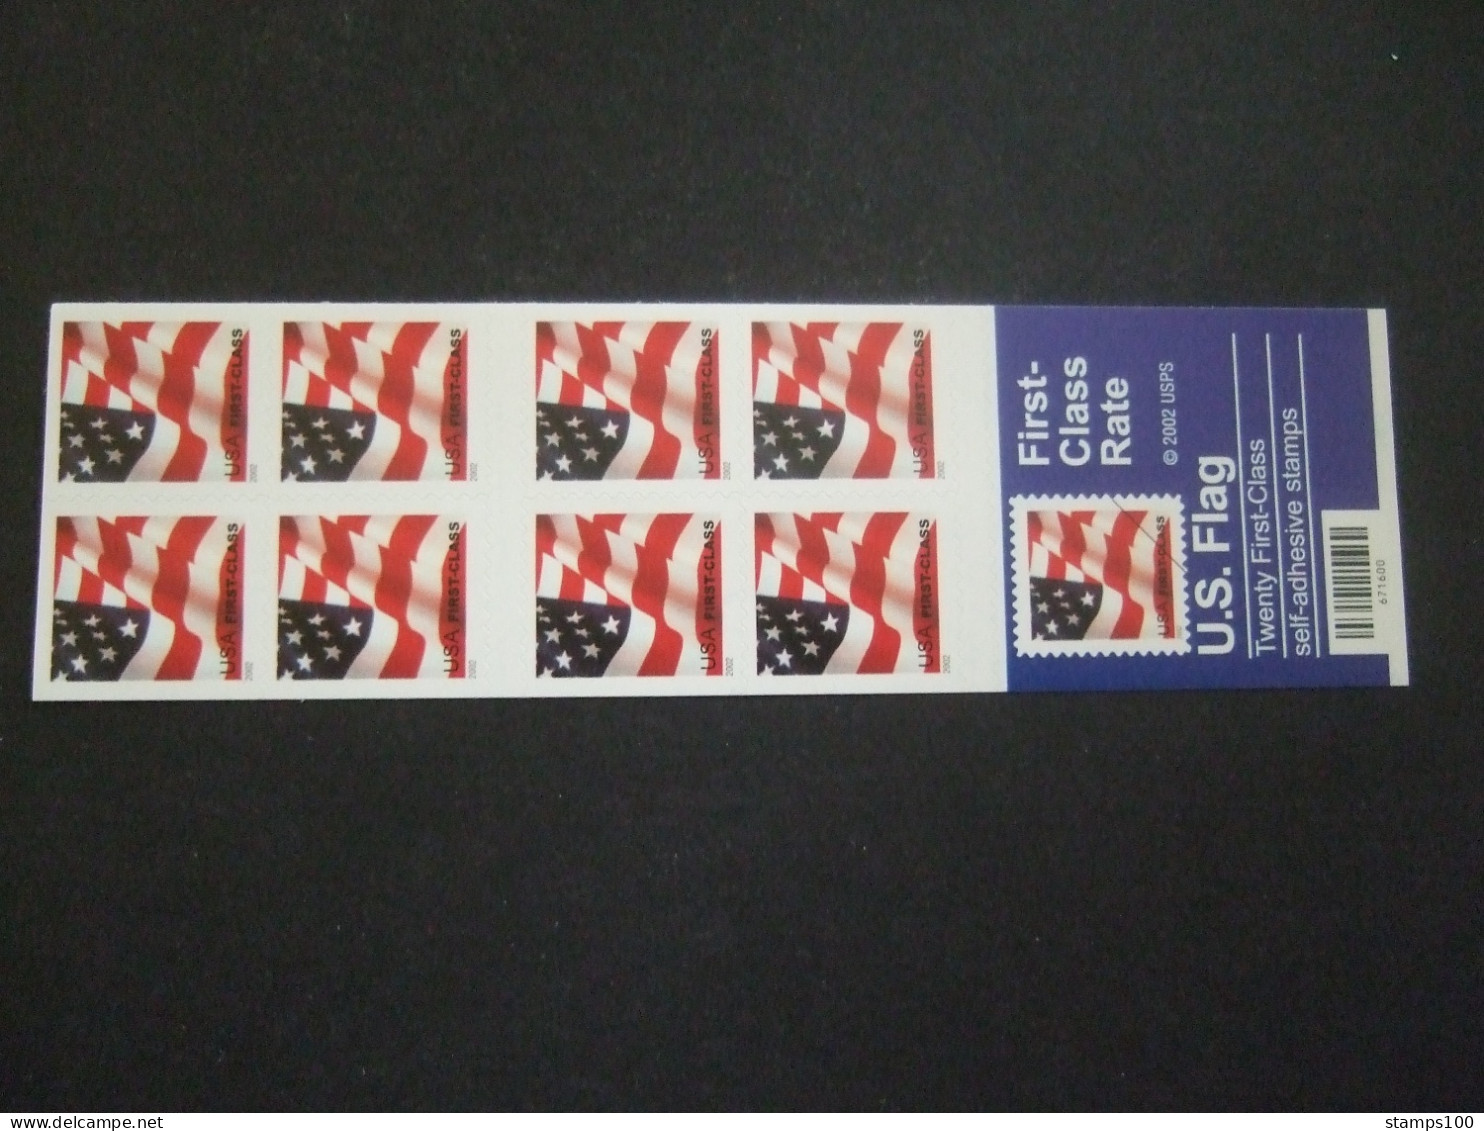 UNITED STATES, 2002, CURRENT ISSUE, FLAG, DOUBLE SIDED BOOKLET, MNH** (S54-TVN) - 1981-...